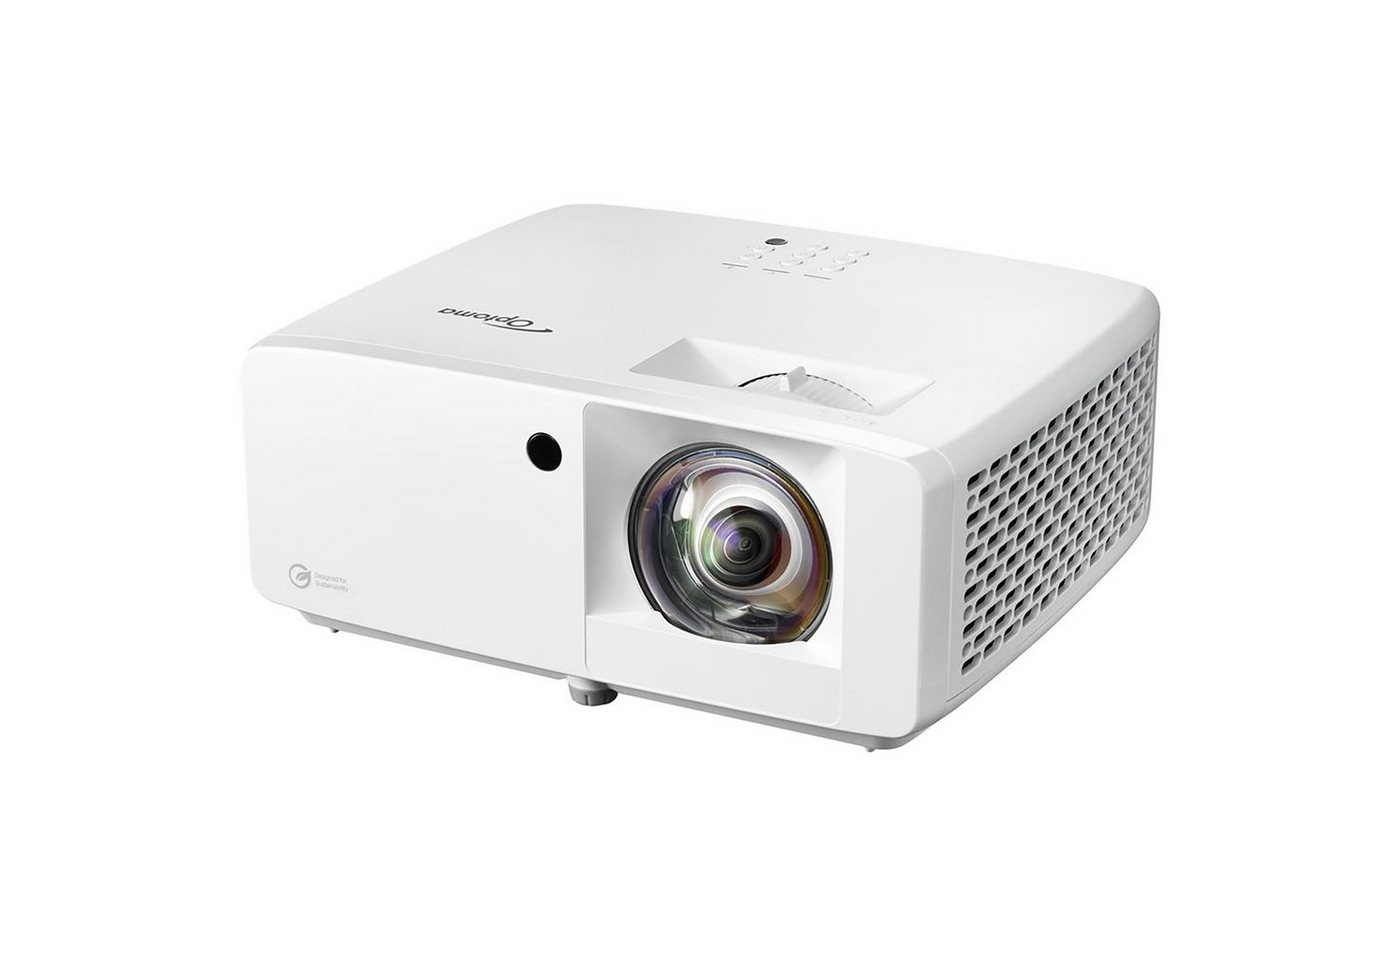 Optoma GT2100HDR 3D-Beamer (4200 lm, 2000000:1, 1920 x 1080 px) von Optoma